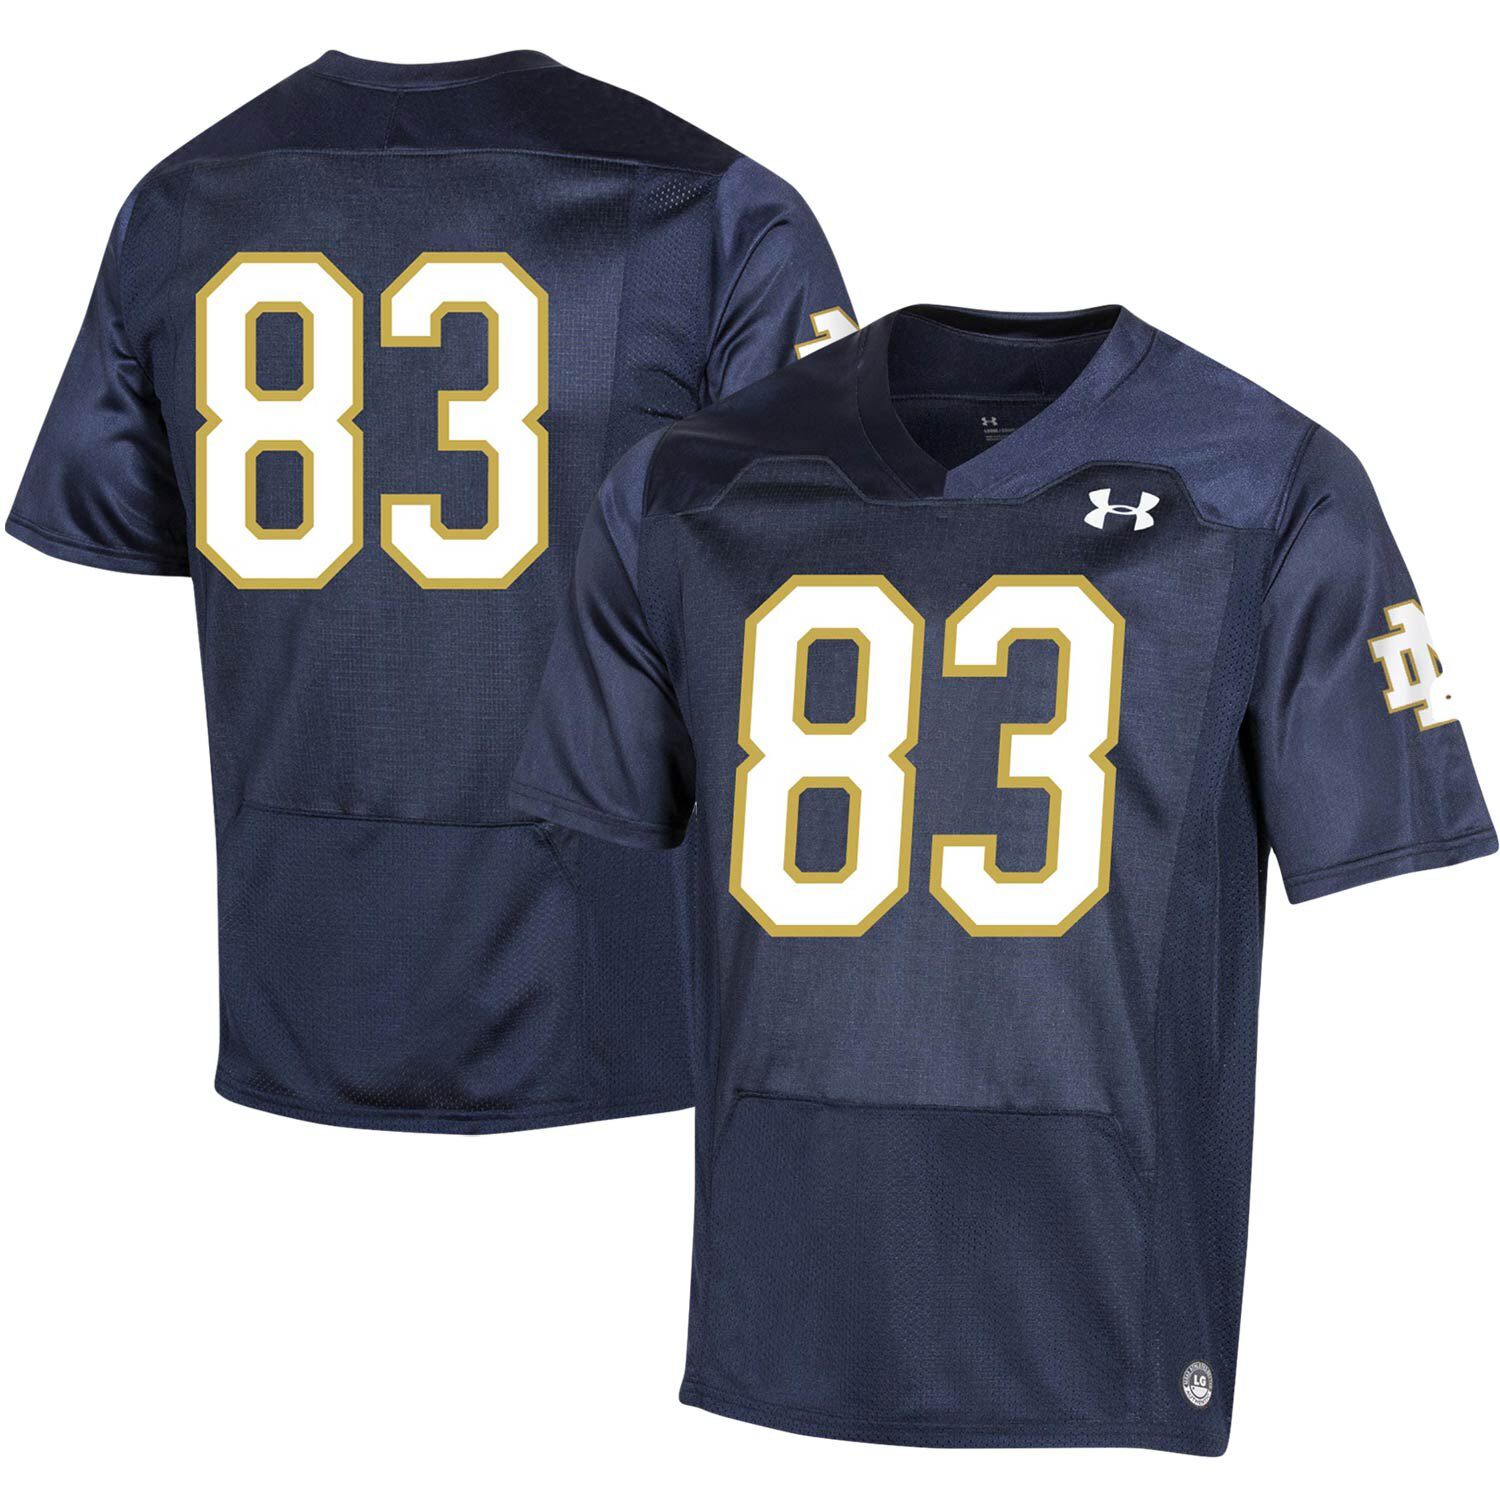 notre dame football names on jerseys